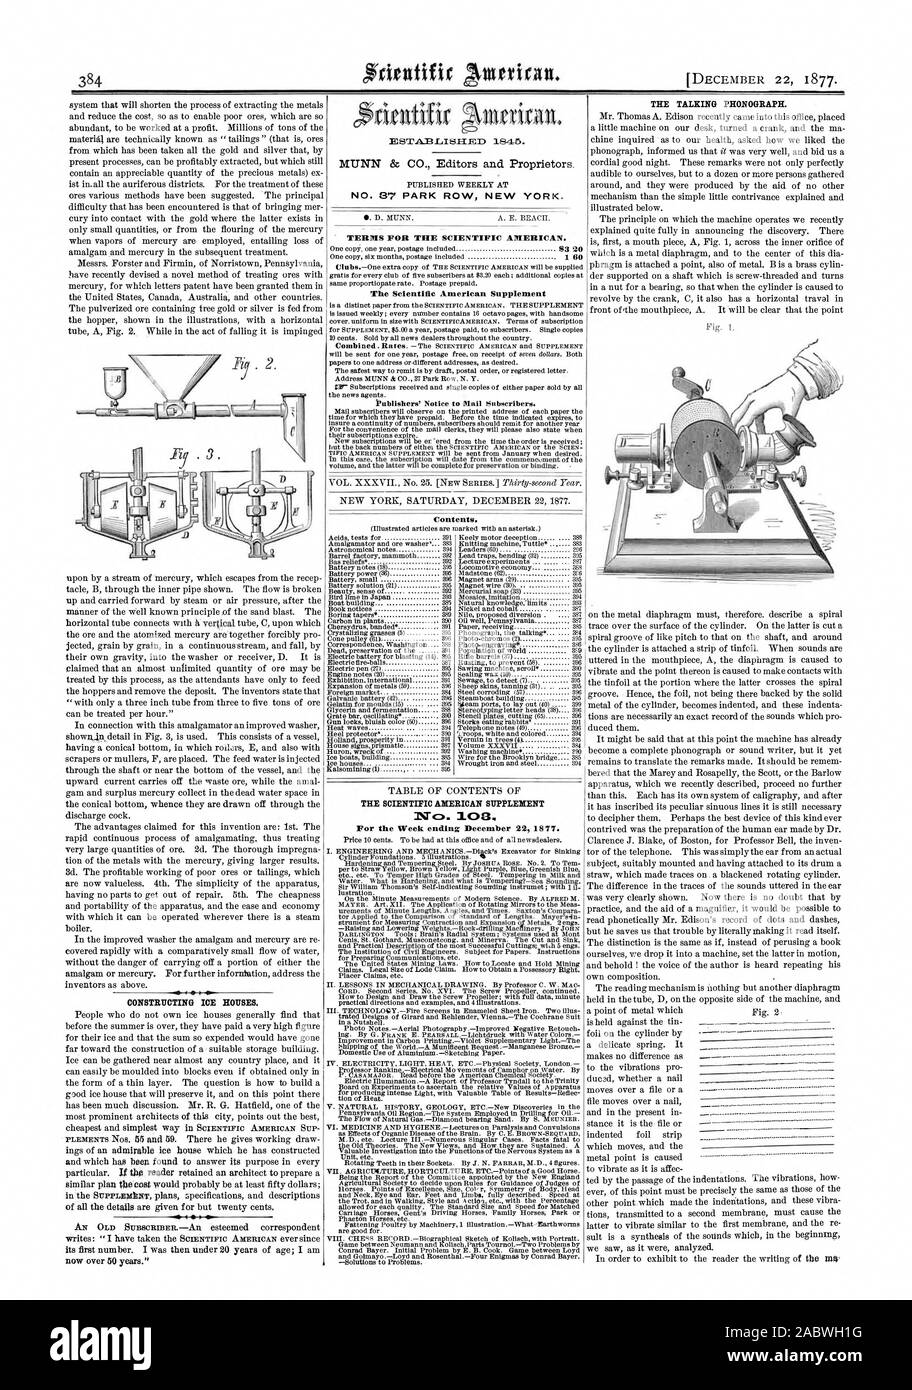 CONSTRUCTING ICE HOUSES. NO. 87 PARK ROW NEW YORK. TERMS FOR THE SCIENTIFIC AMERICAN. The Scientific American Supplement Contents. Nca. 103 For the Week ending December 22 1877. THE TALKING PHONOGRAPH. Barrel Photo-engravit, 1877-12-22 Stock Photo